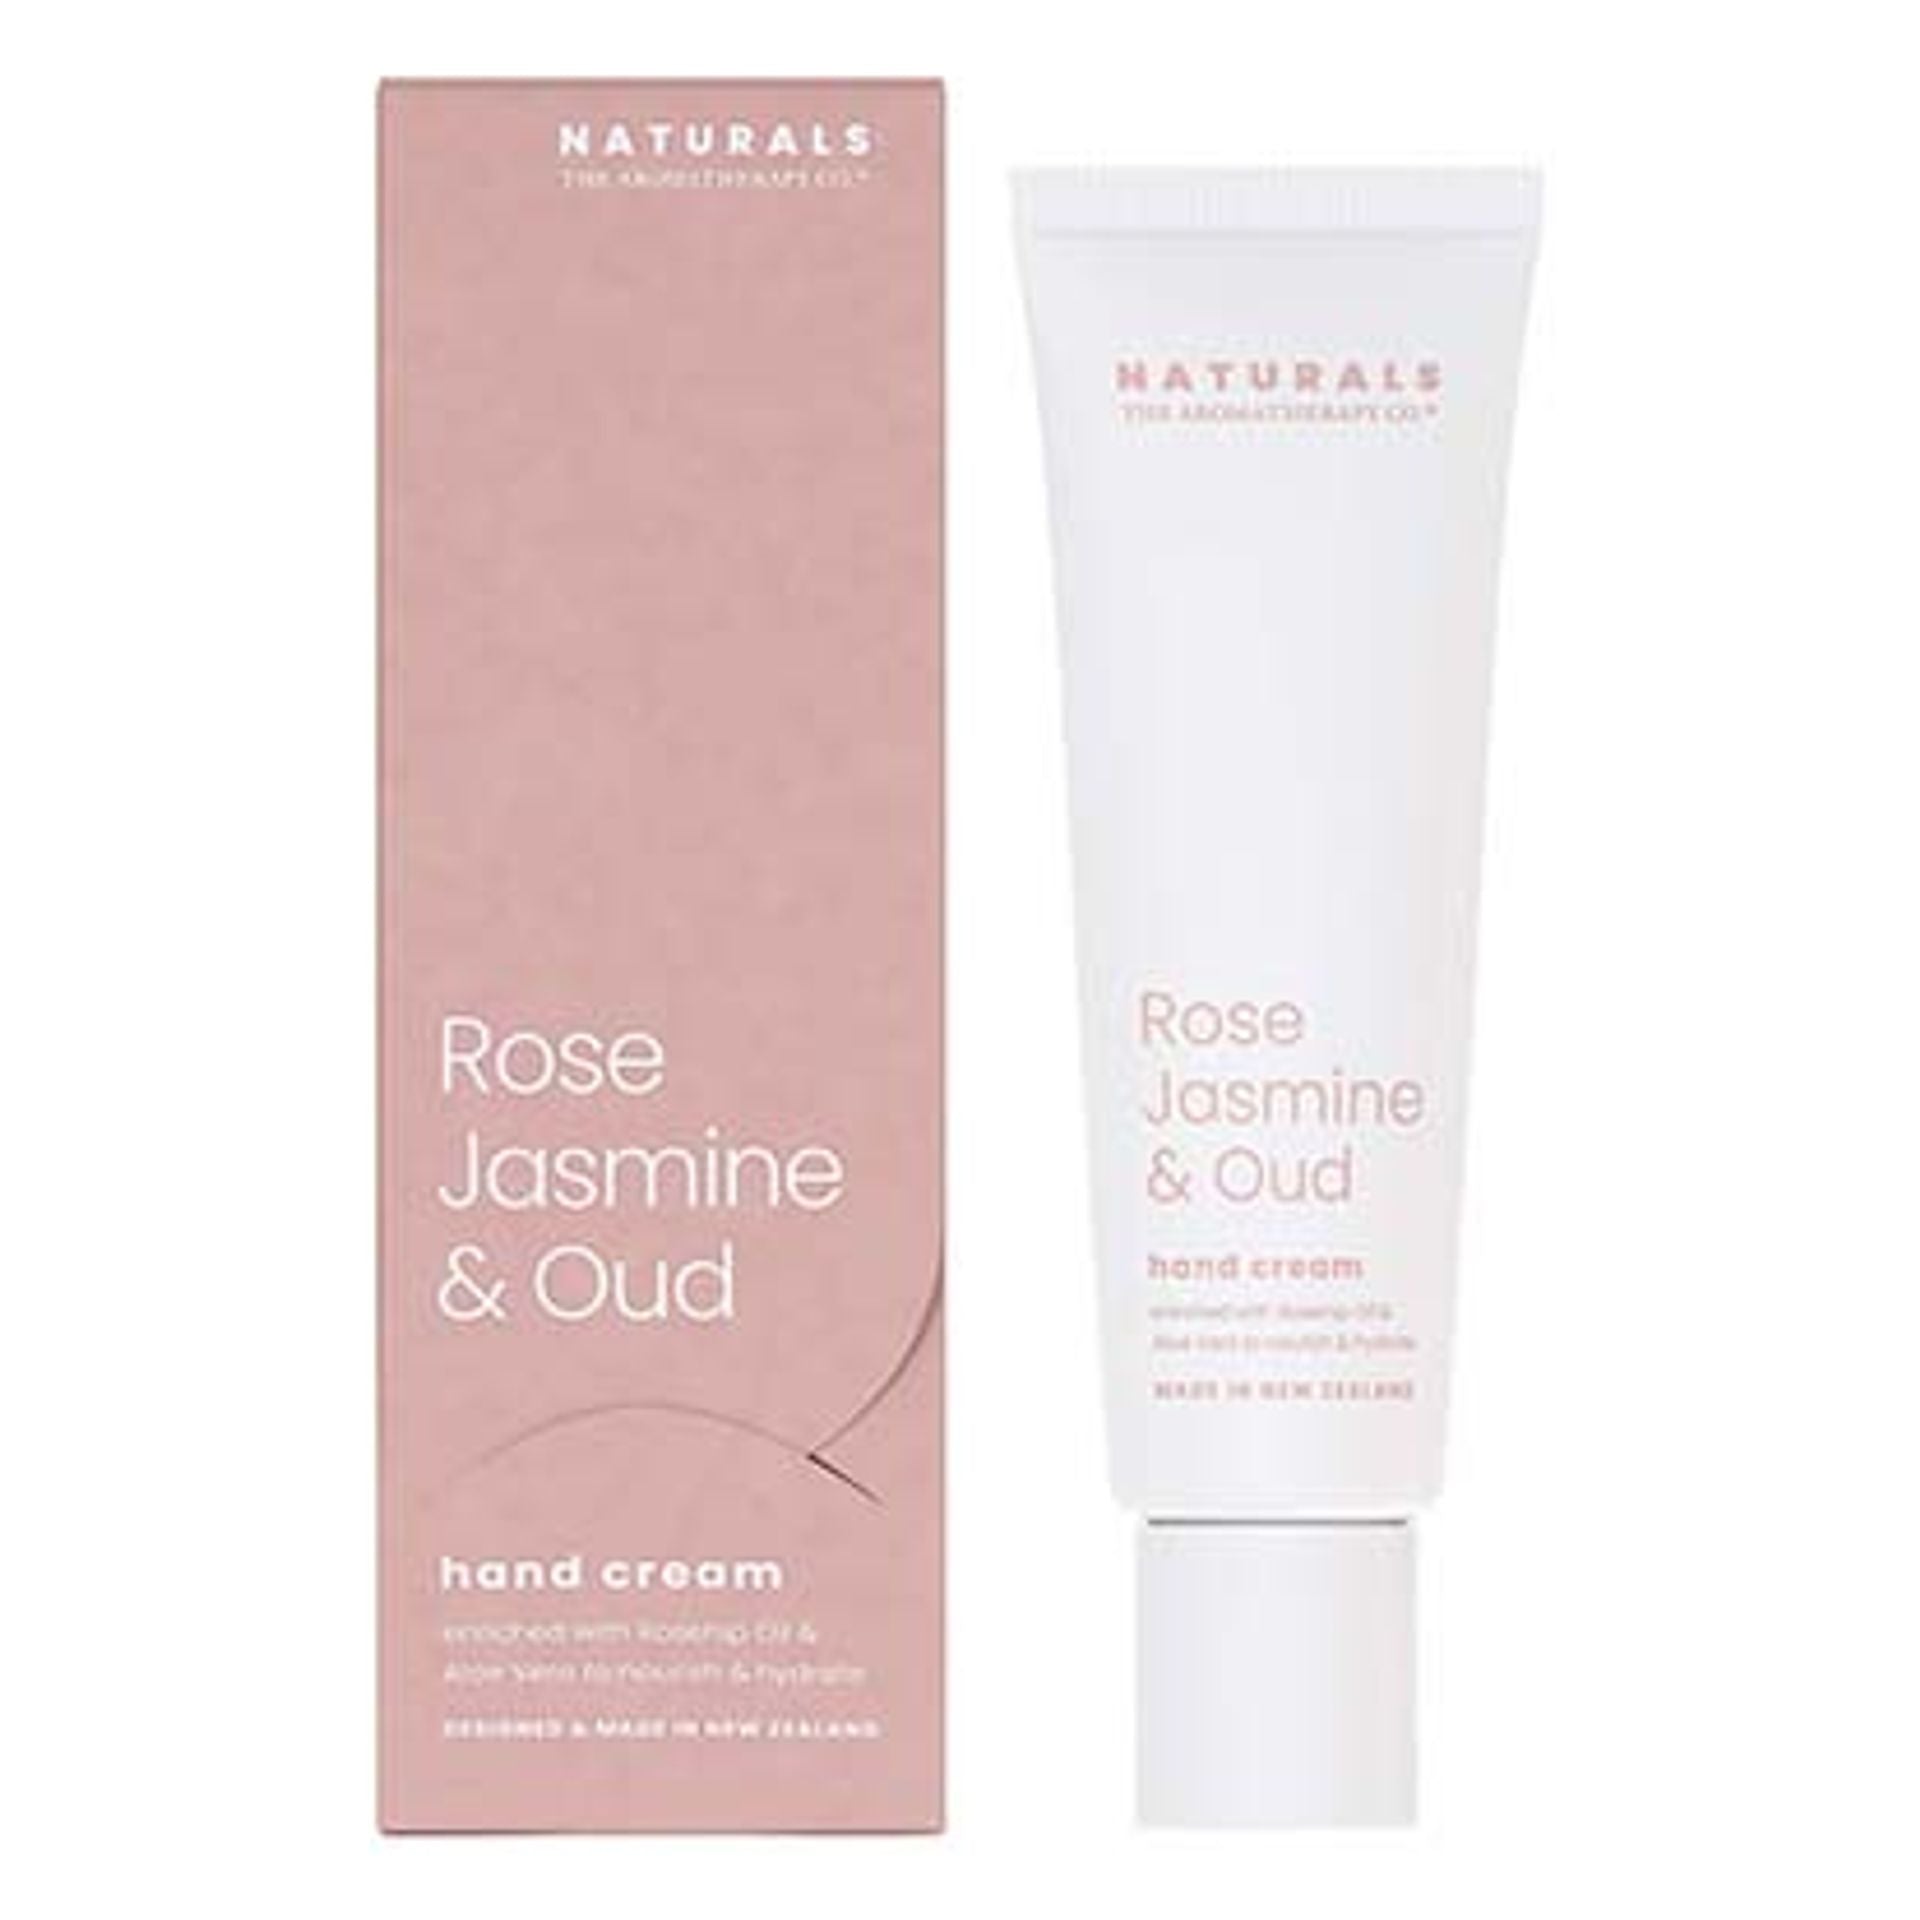 The Aromatherapy Co Naturals Rose Jasmine & Oud Hand Cream